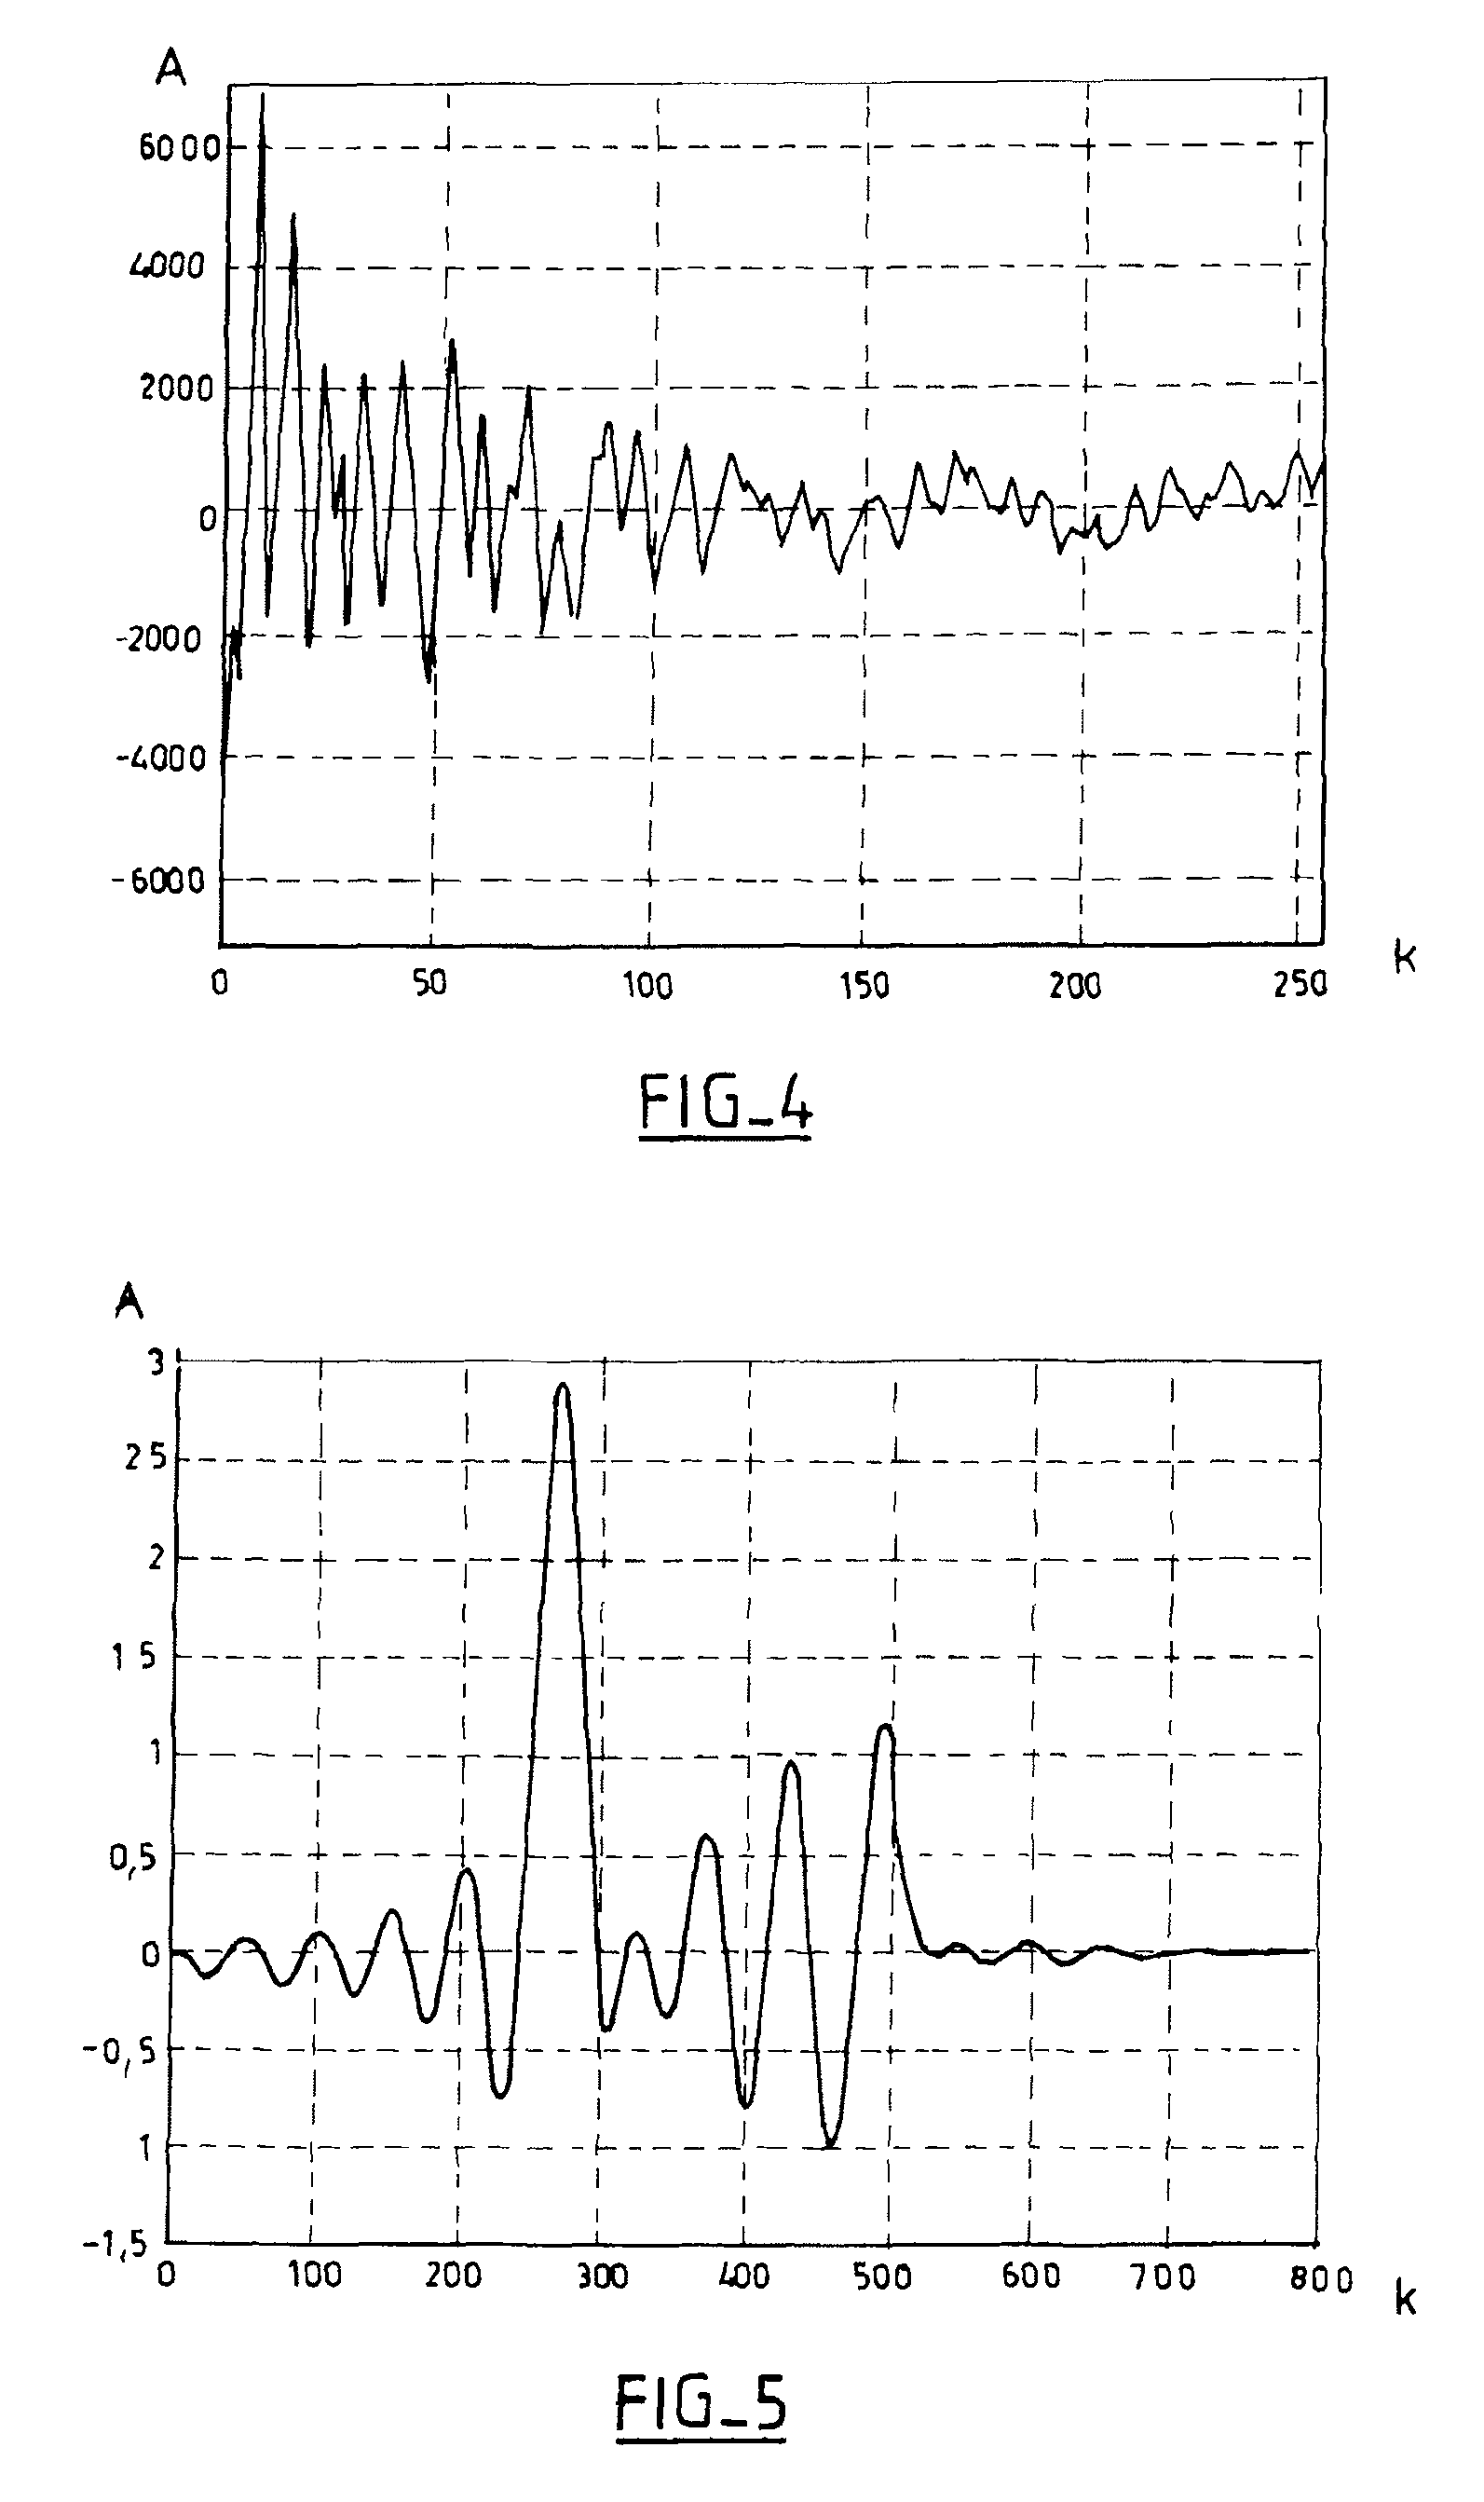 Audio equipment including means for de-noising a speech signal by fractional delay filtering, in particular for a “hands-free” telephony system